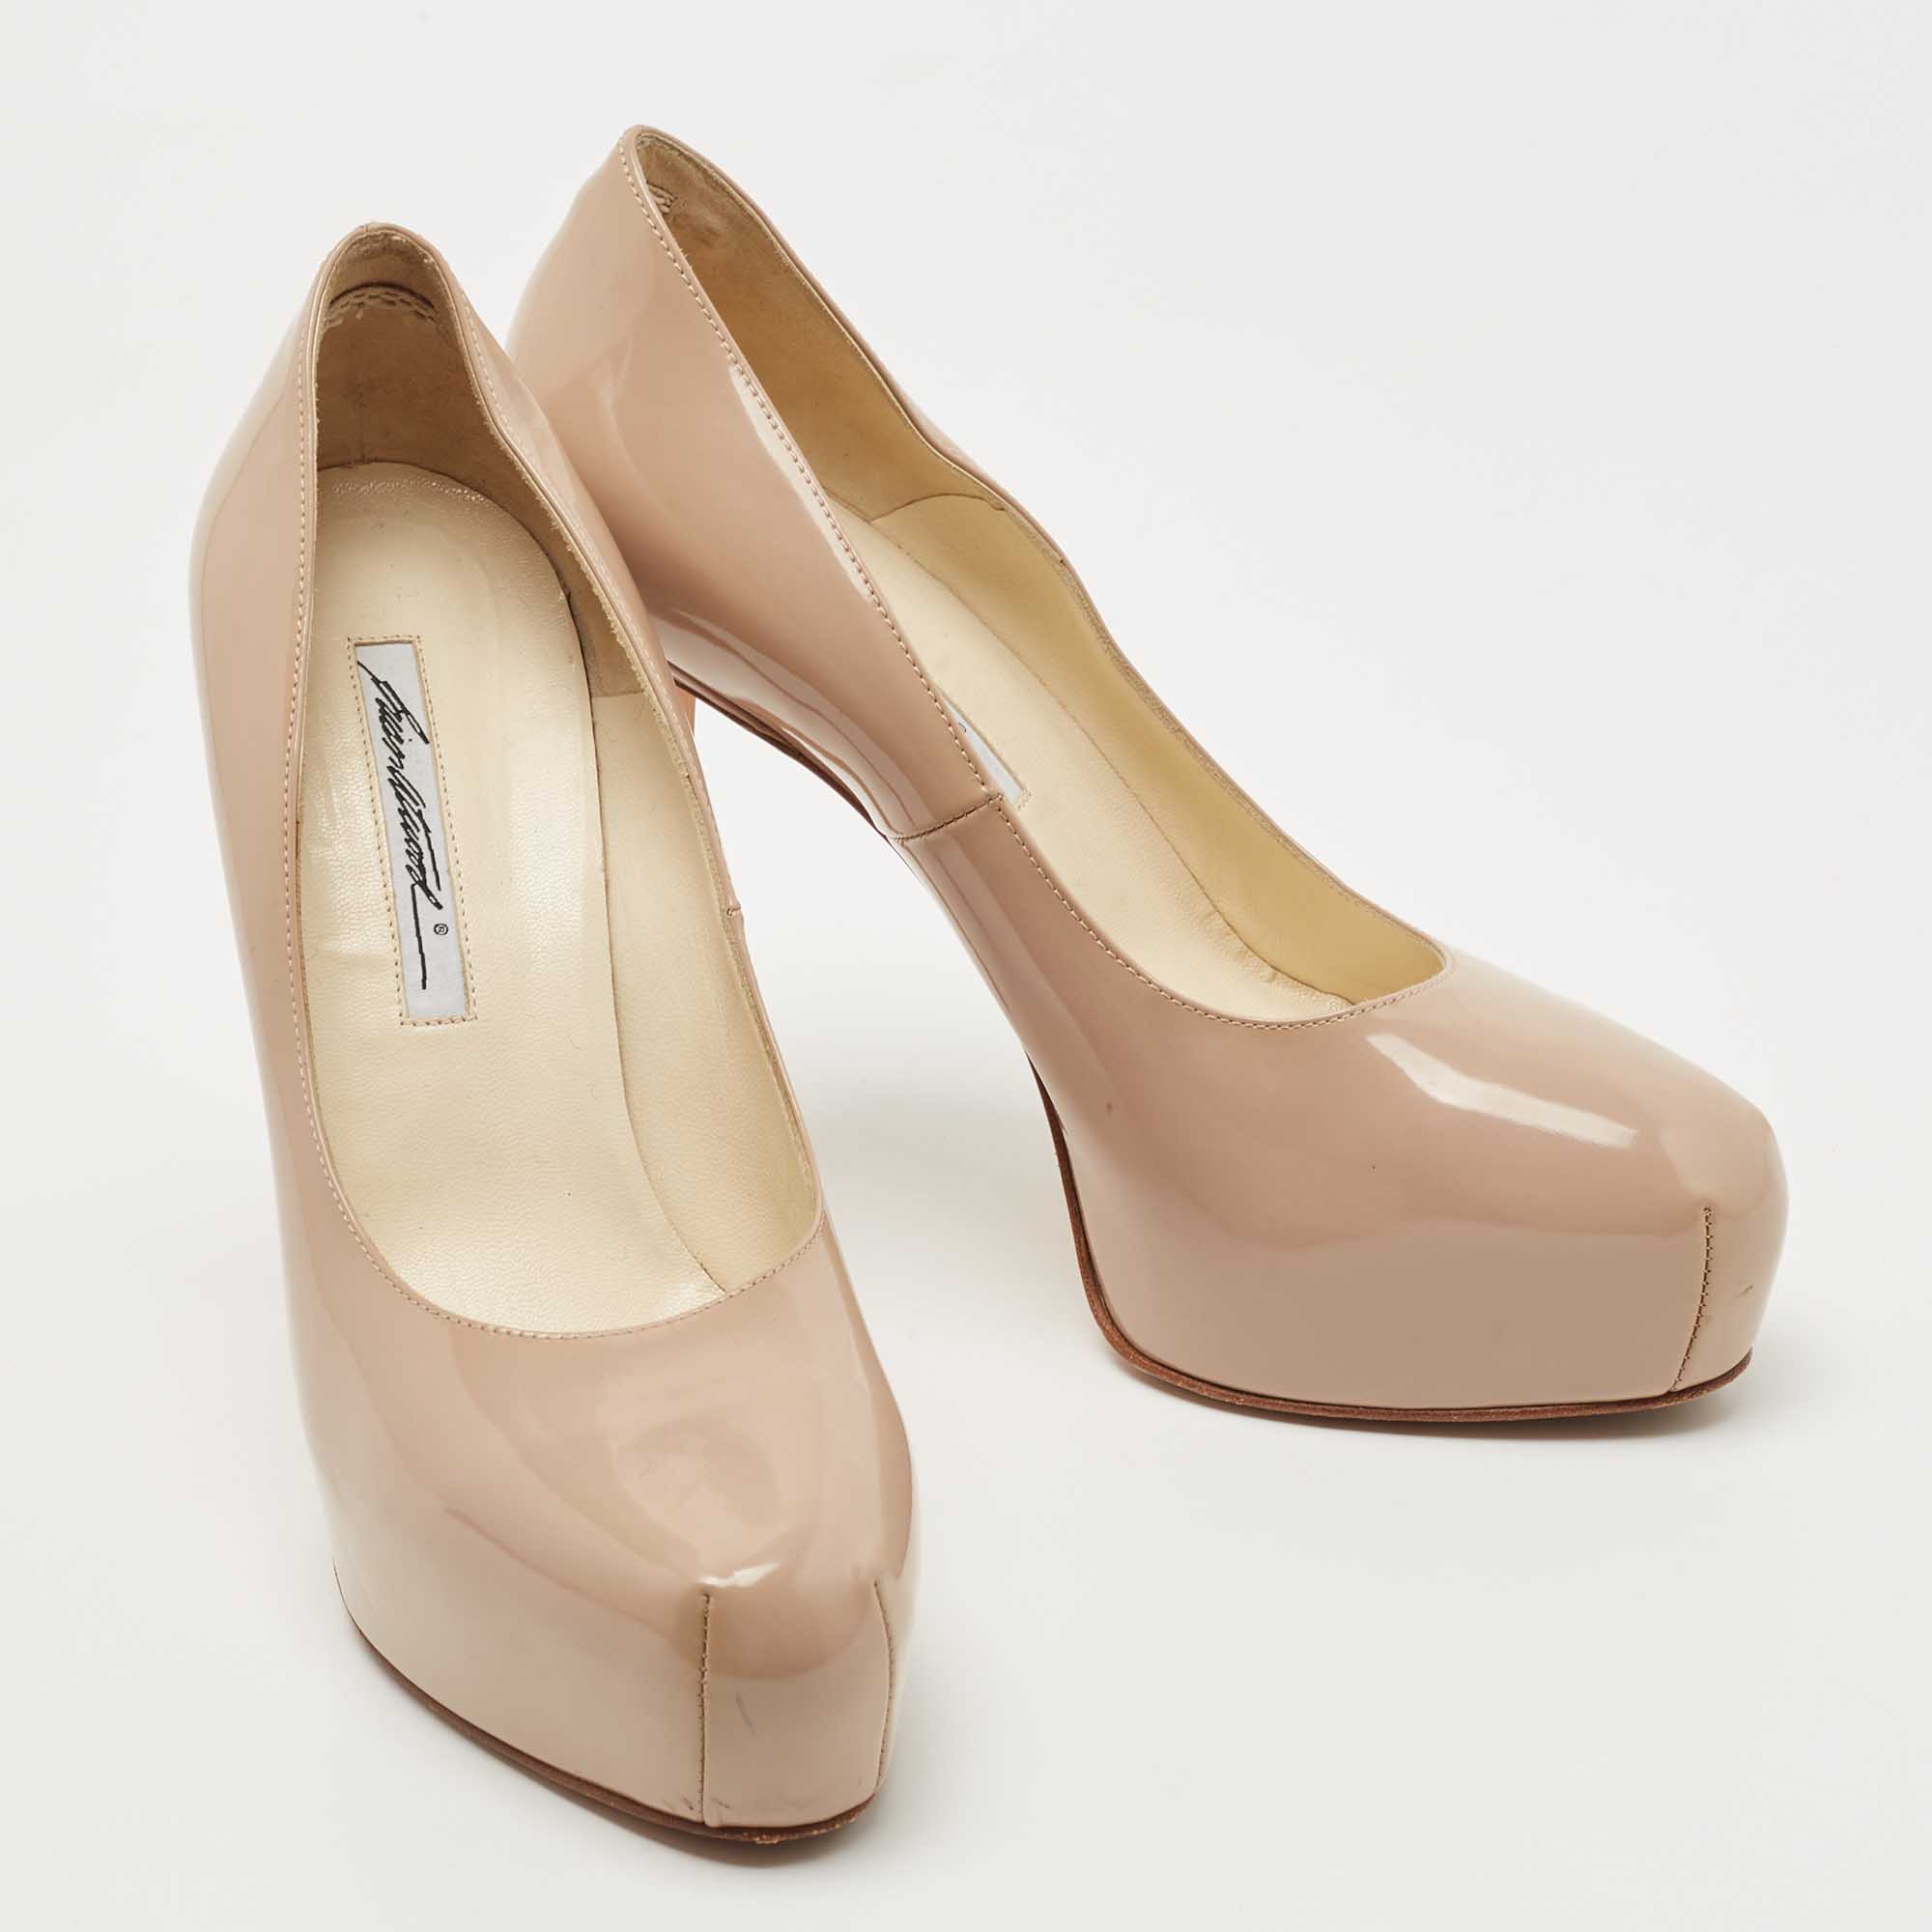 Brian Atwood Beige Patent Leather Platform Pumps Size 39.5